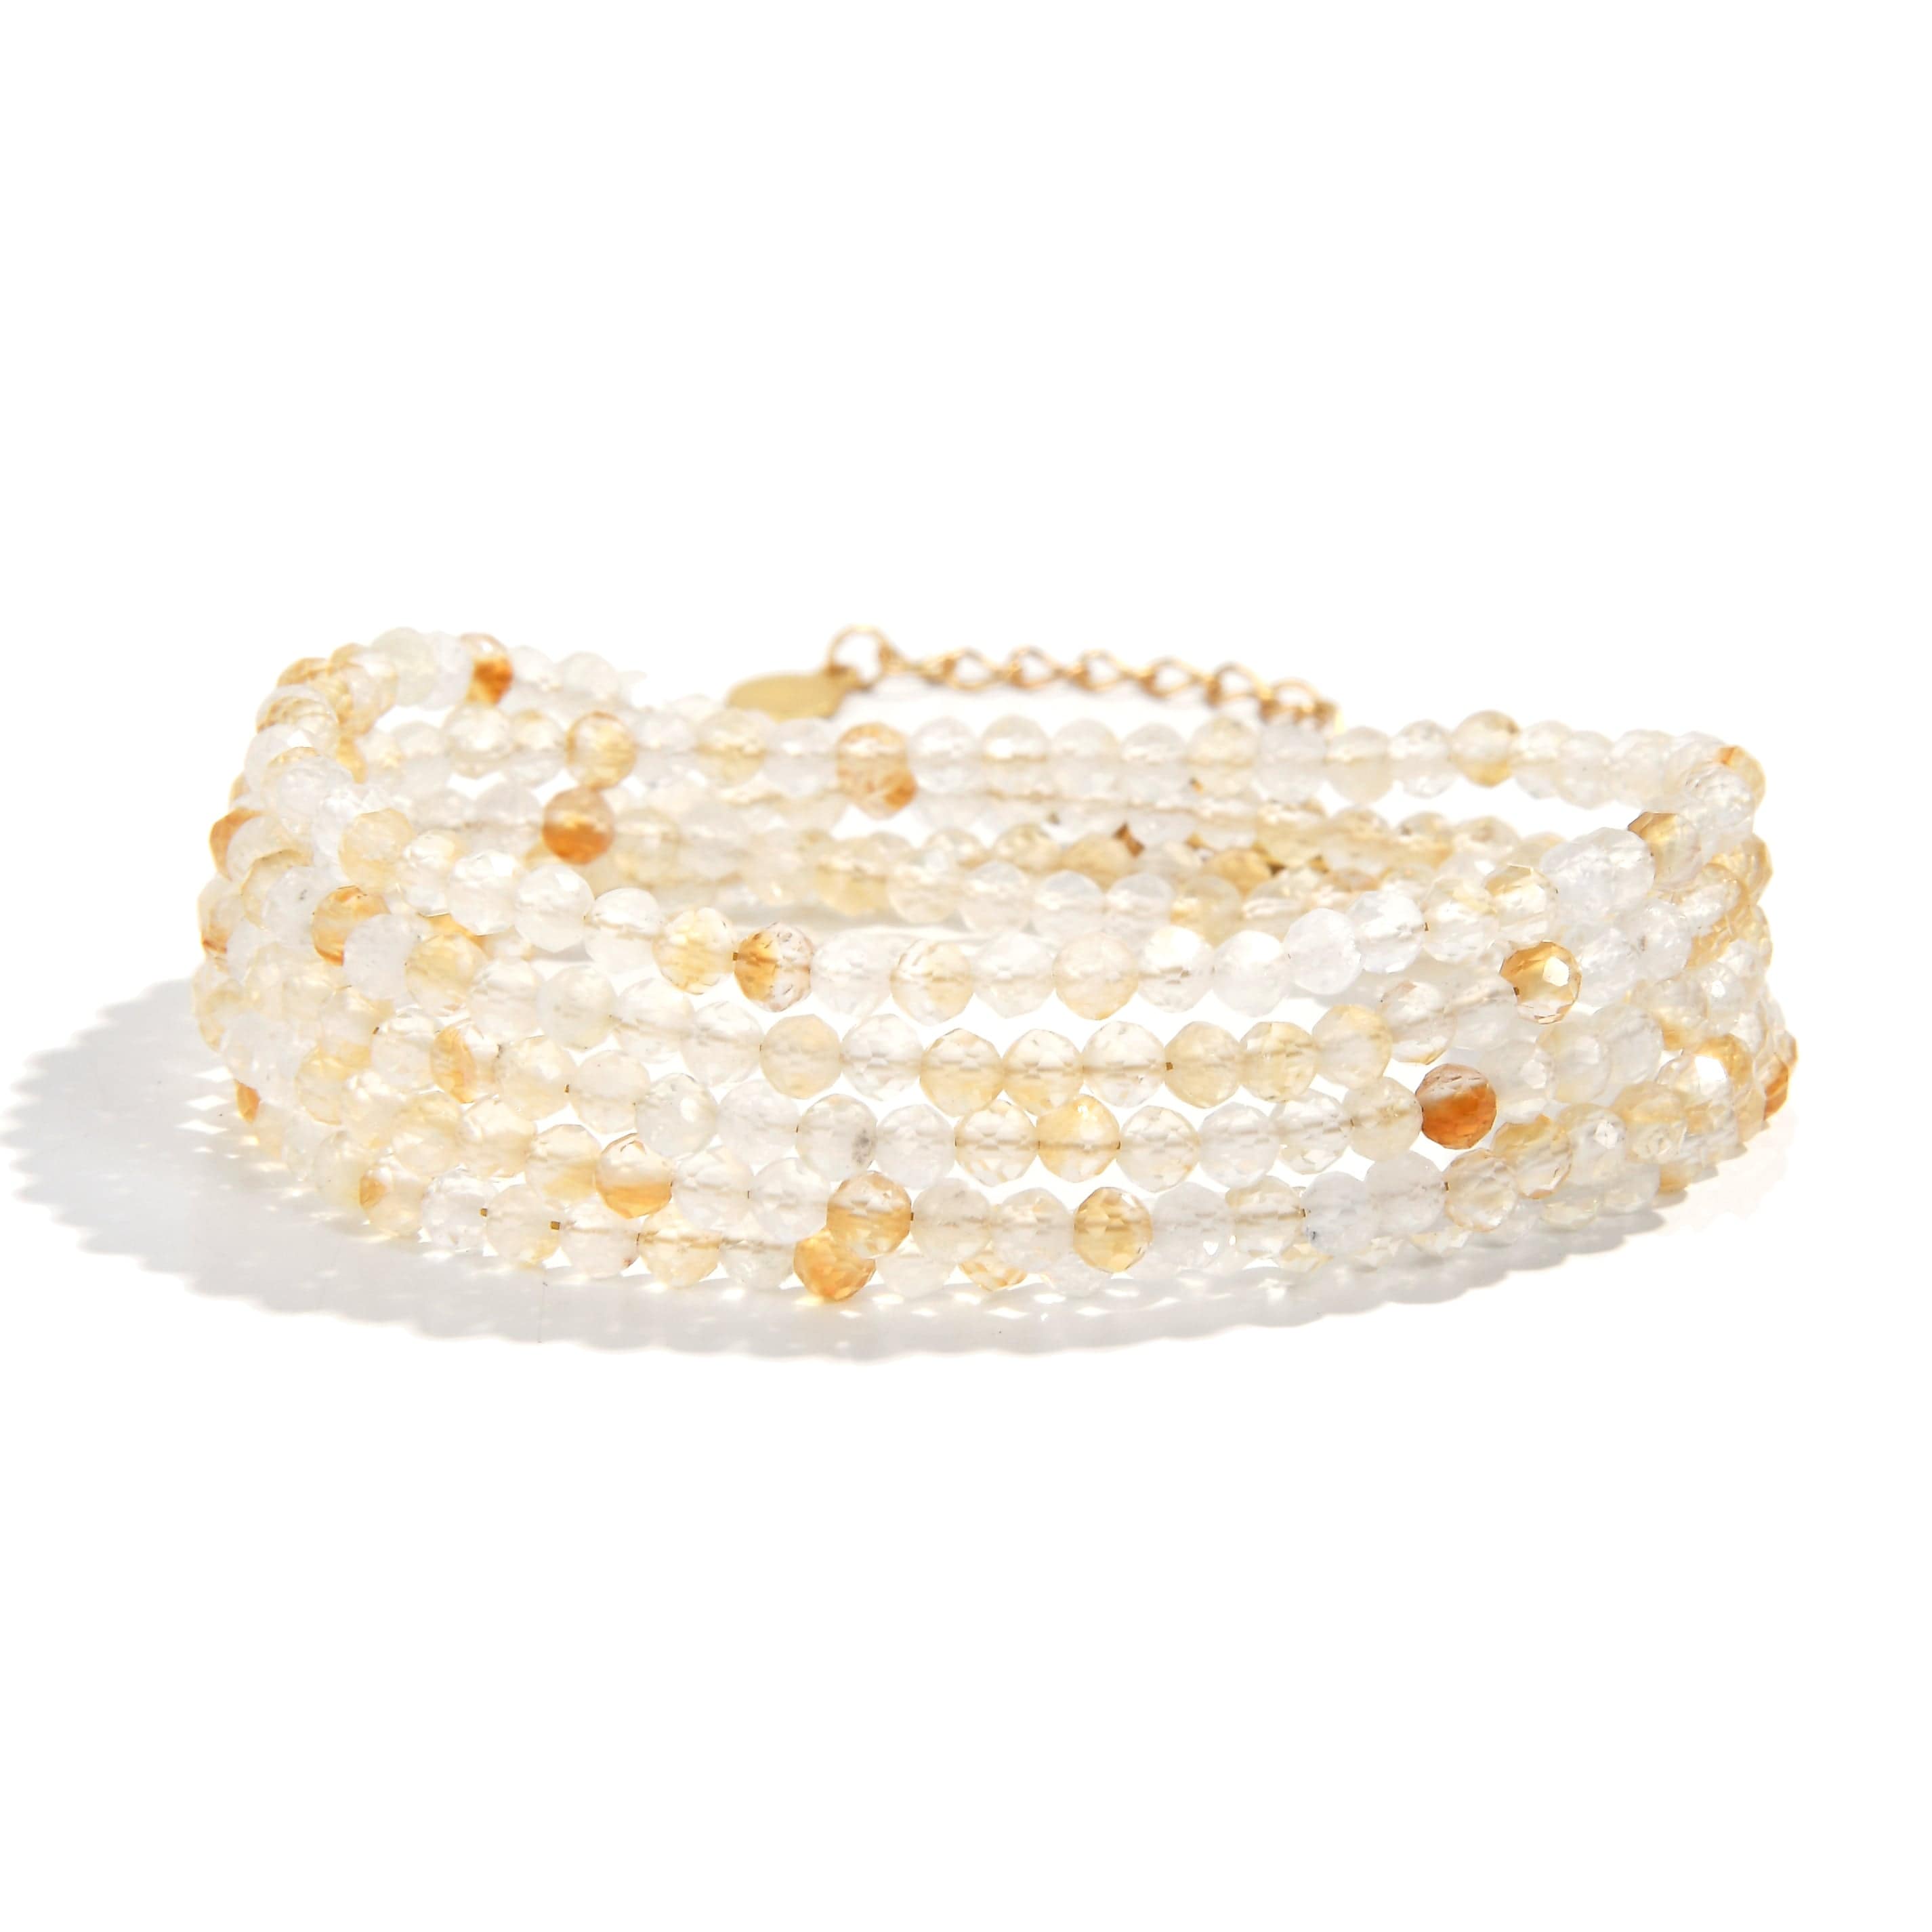 KALIFANO Gemstone Jewelry 3mm Citrine Faceted 31" Necklace / Multi Wrap Bracelet N3-79G-CT